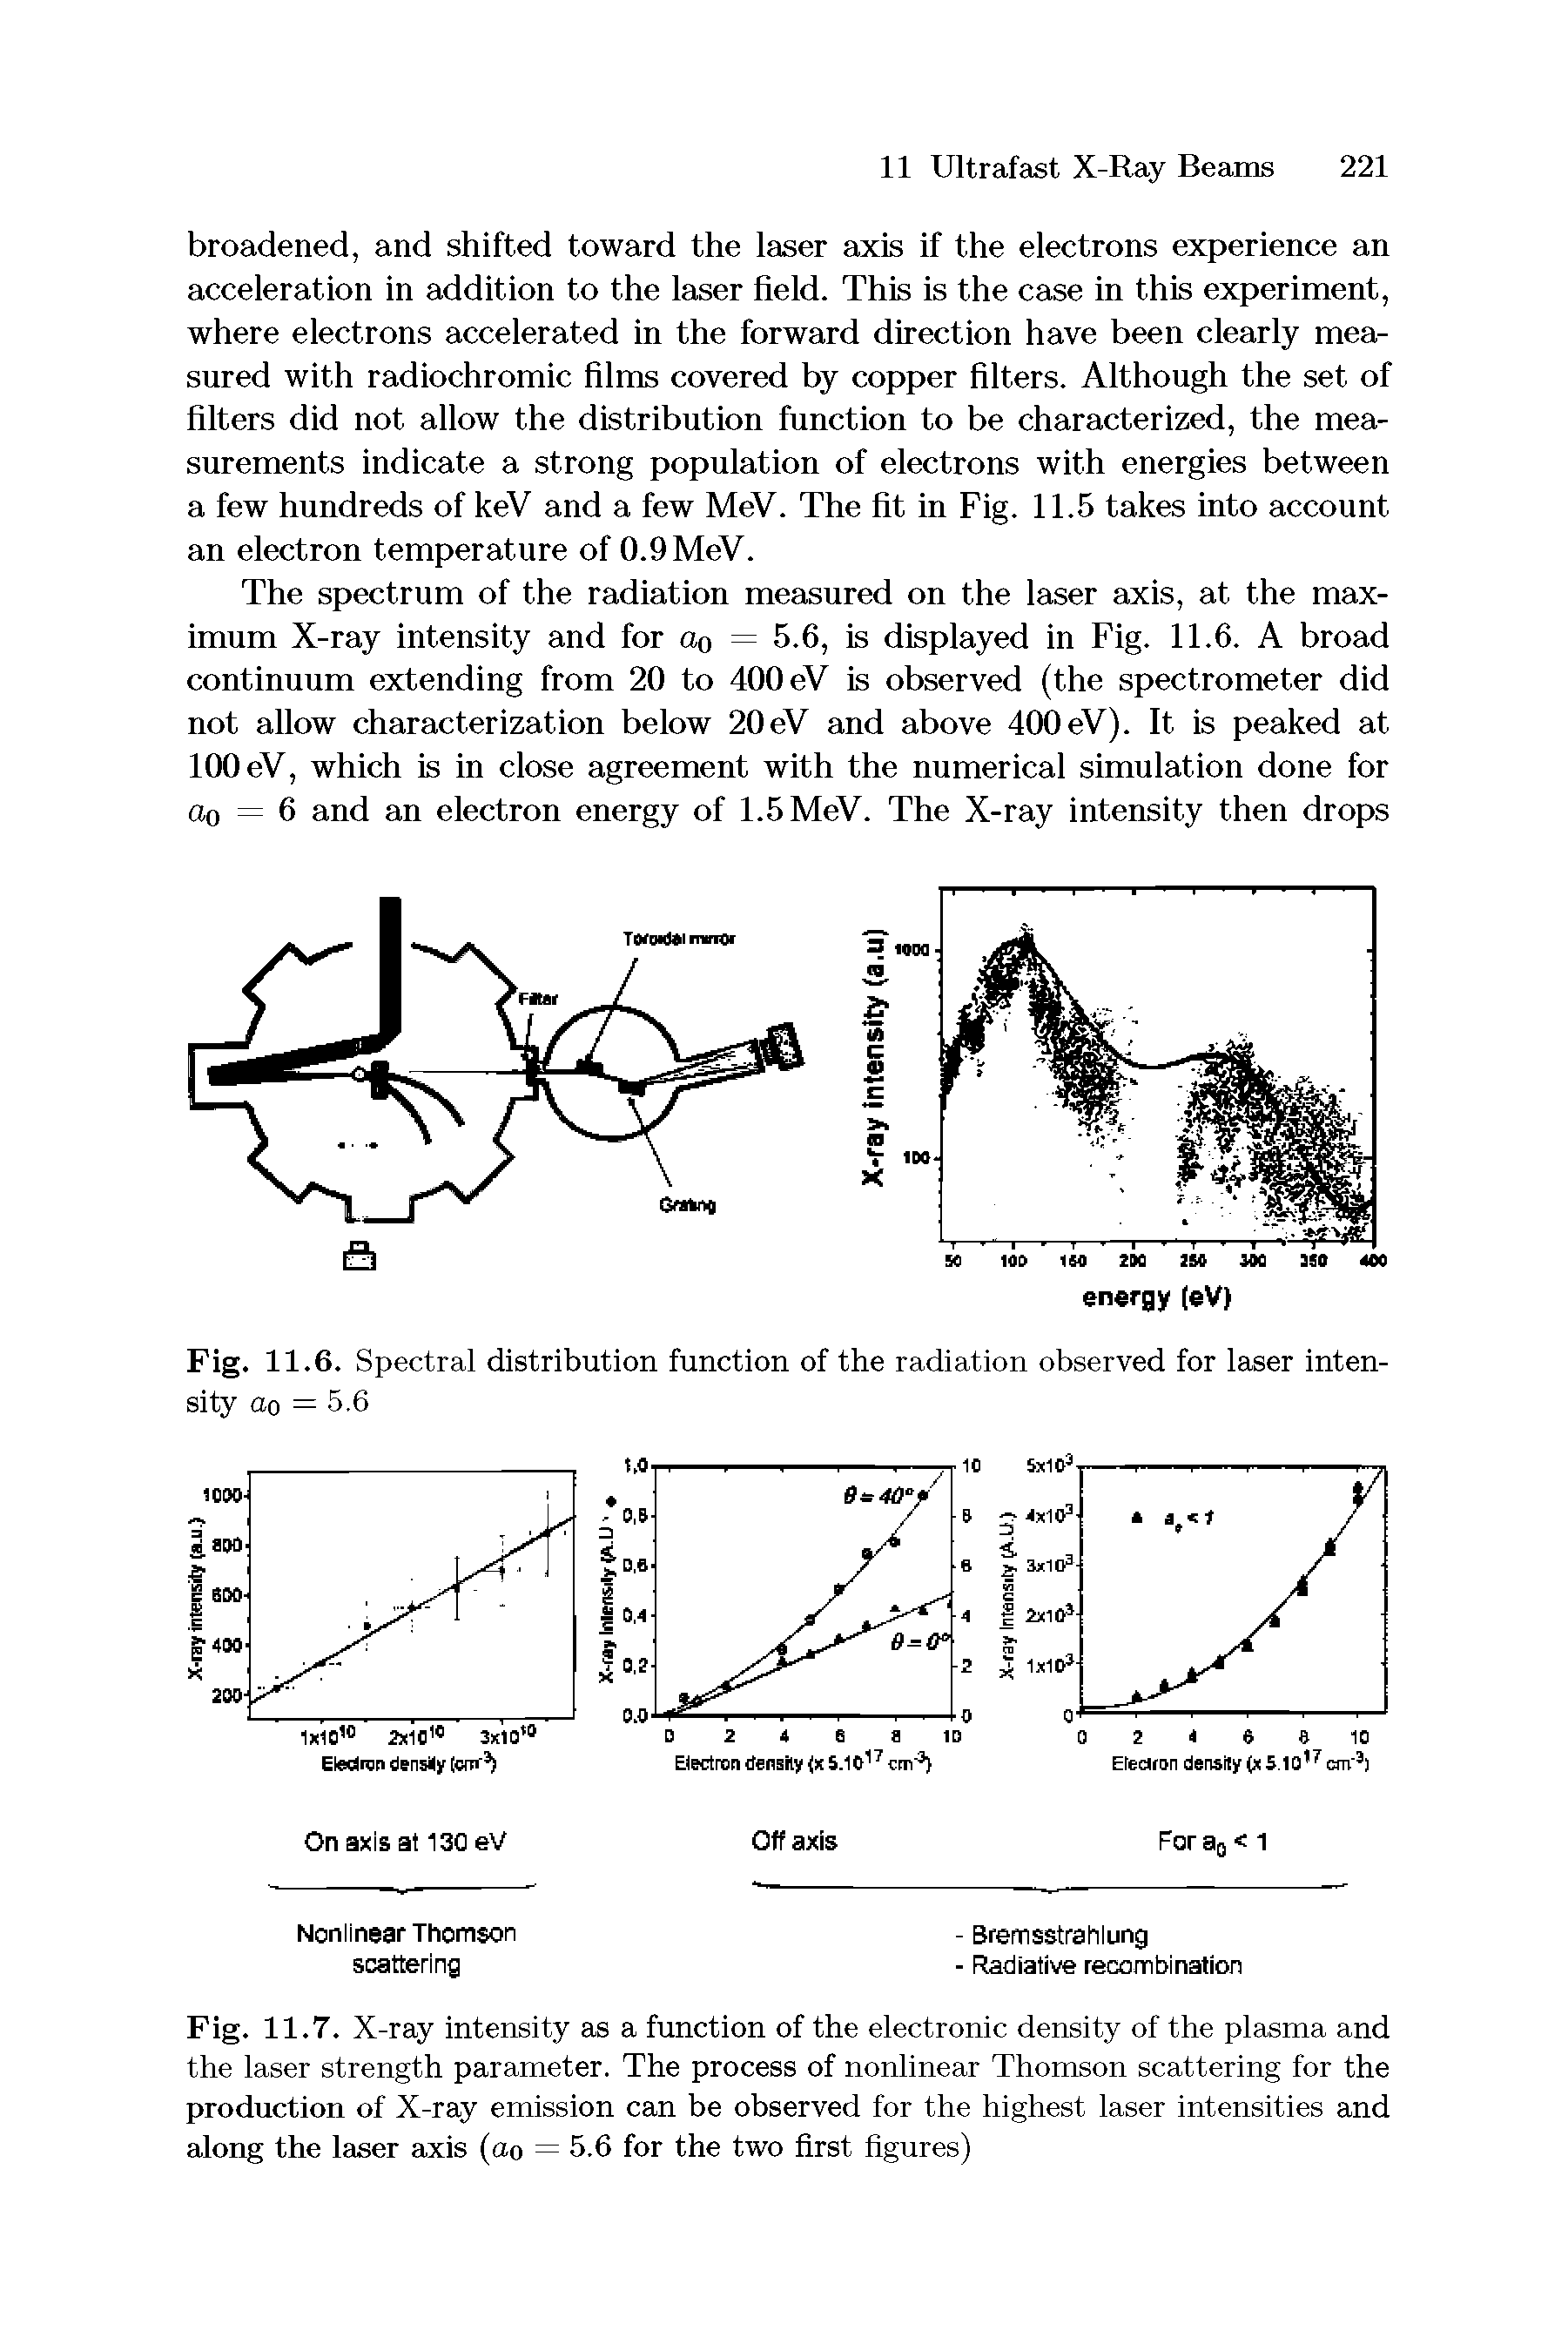 Fig. 11.7. X-ray intensity as a function of the electronic density of the plasma and the laser strength parameter. The process of nonlinear Thomson scattering for the production of X-ray emission can be observed for the highest laser intensities and along the laser axis (ao = 5.6 for the two first figures)...